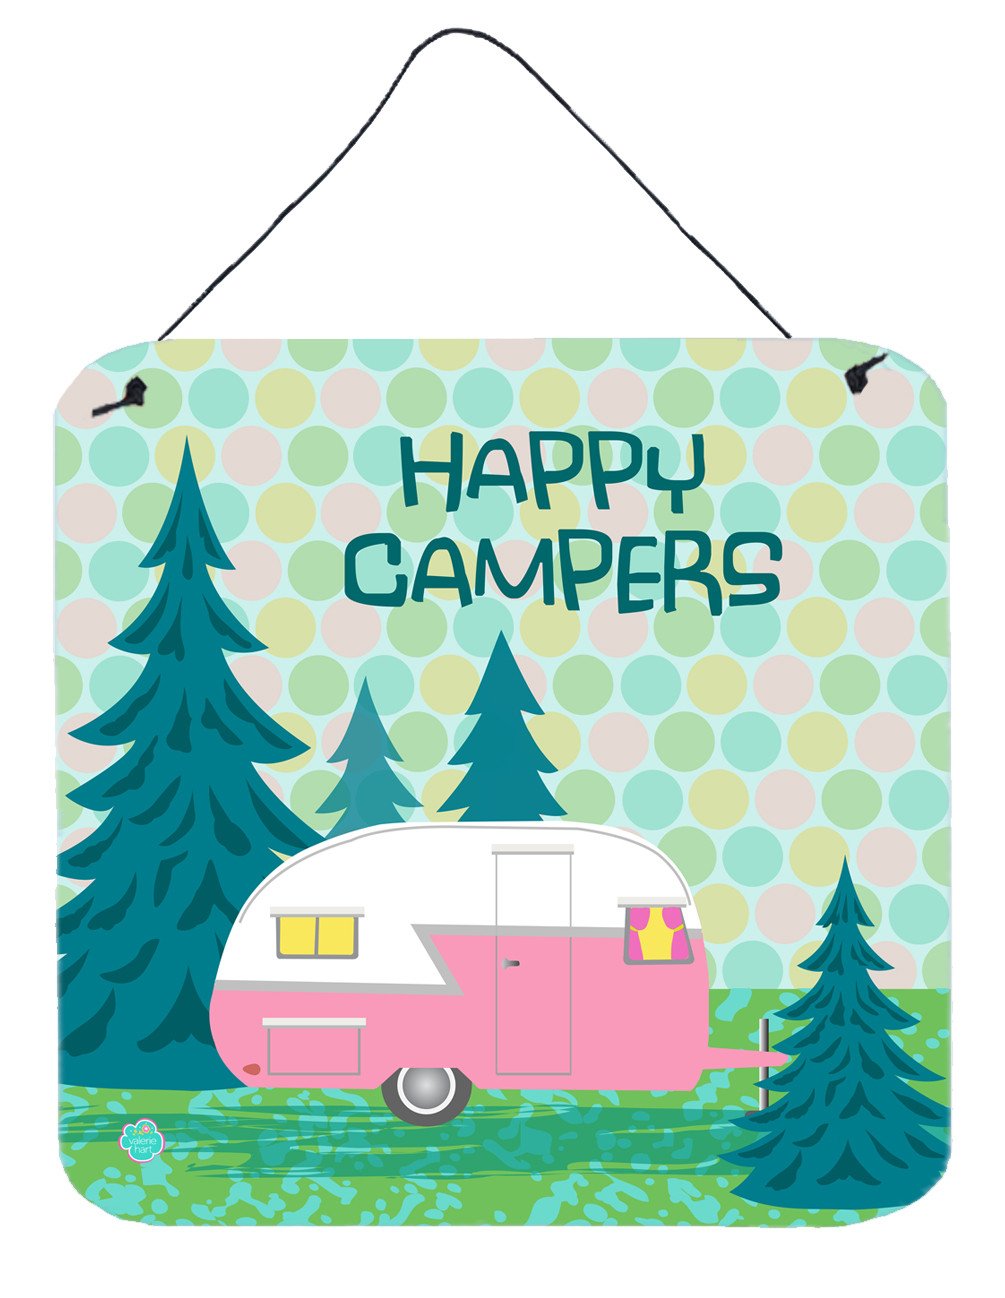 Happy Campers Glamping Trailer Wall or Door Hanging Prints VHA3004DS66 by Caroline's Treasures